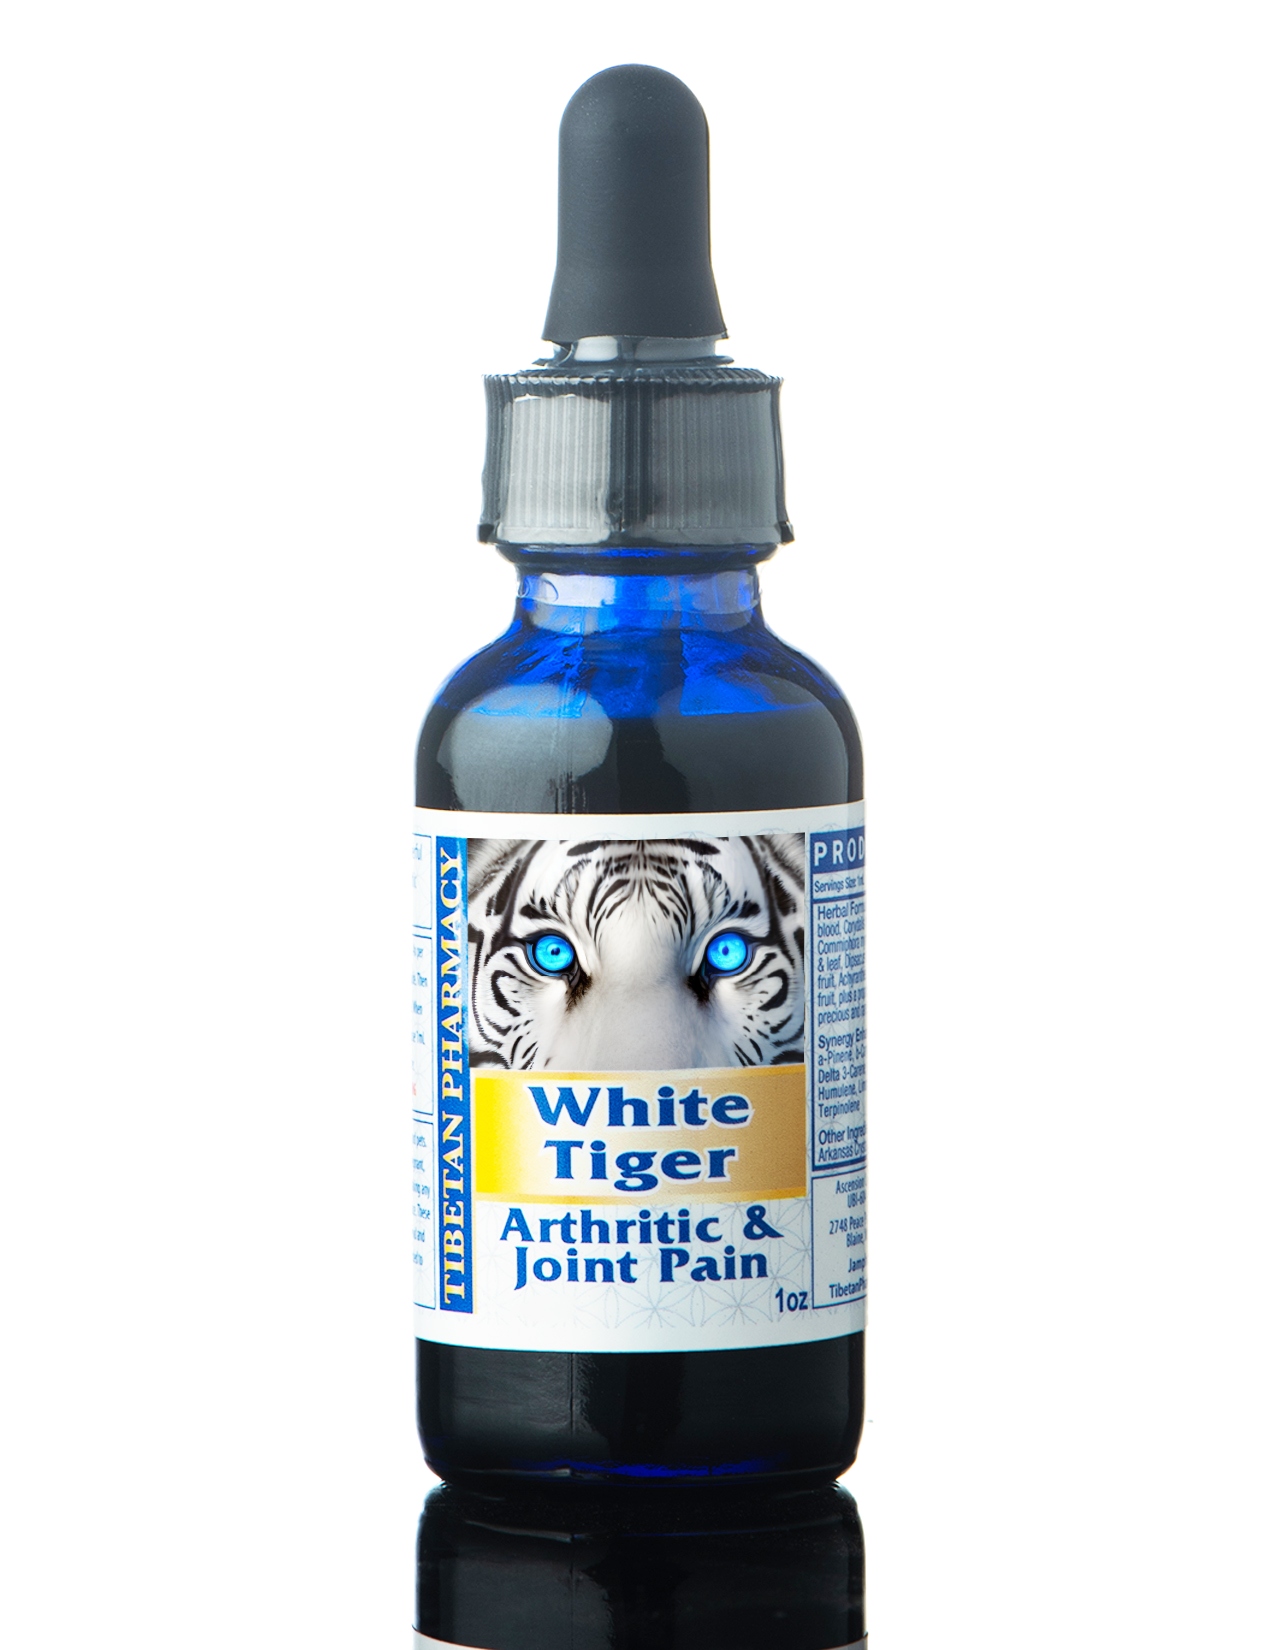 White Tiger | Relieve Inflammation and Arthritic Pain